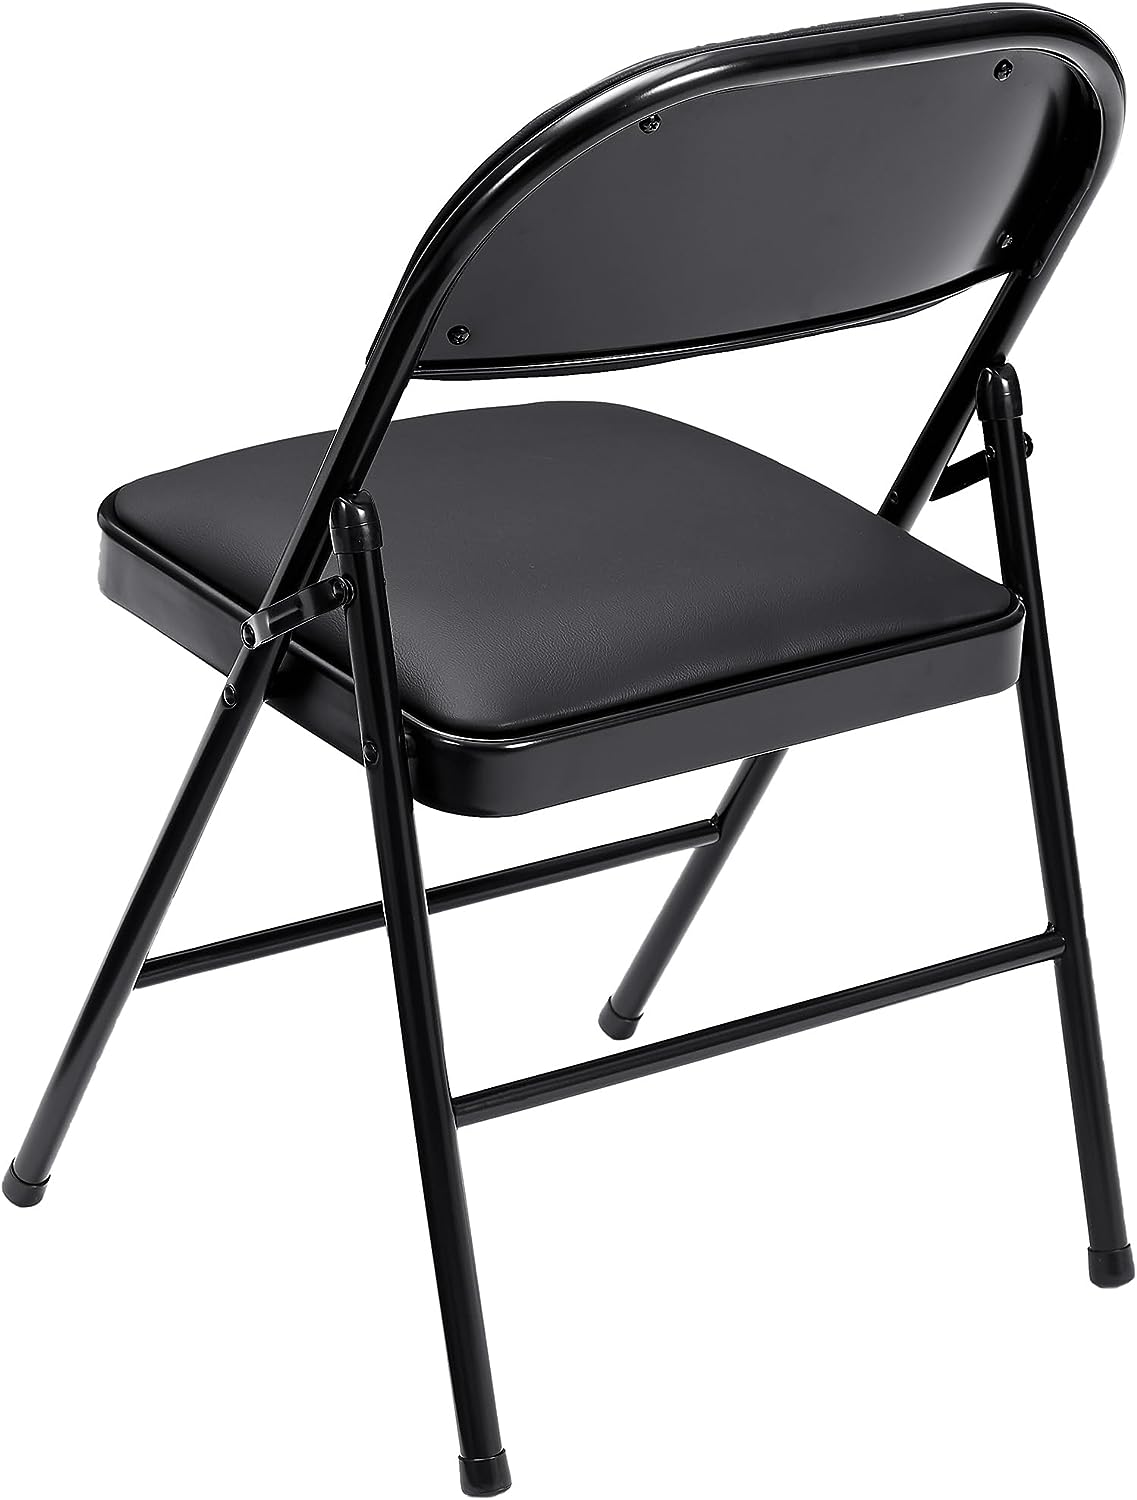 VECELO 4-Pack Portable Metal Folding Chairs with PU Padded Soft Seats Black